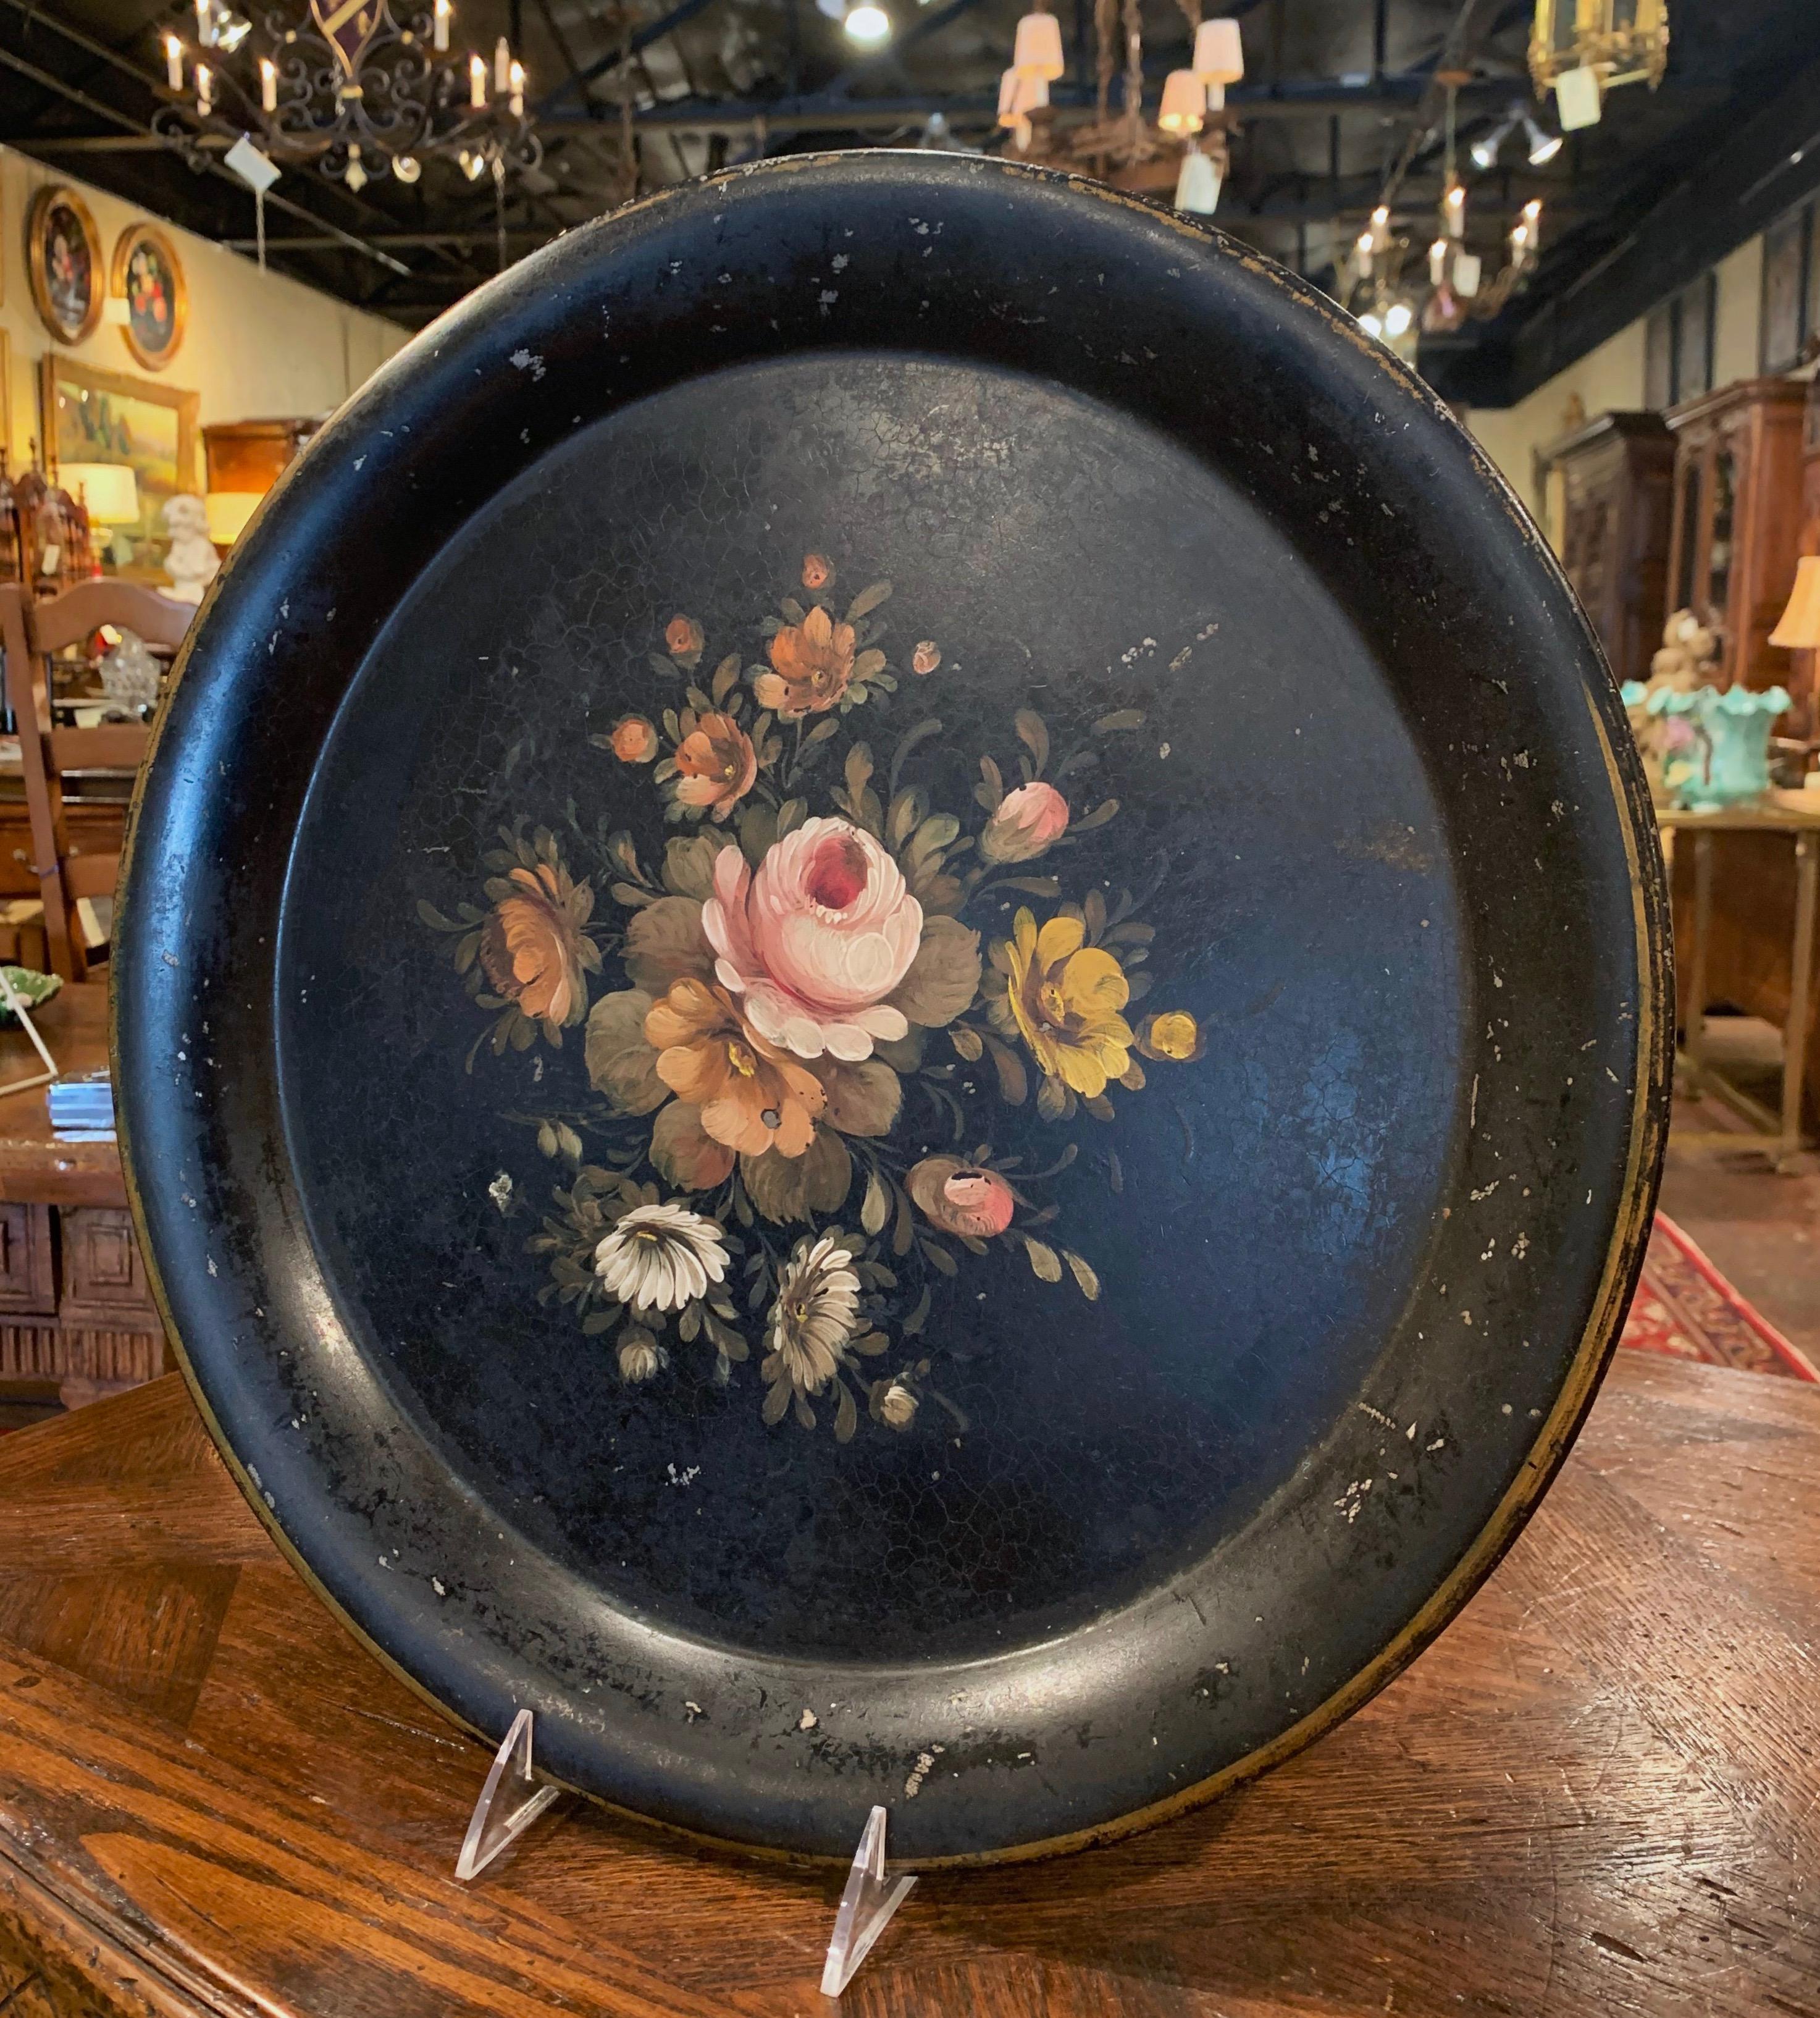 This antique tray was created in Normandy, France, circa 1870; round in shape, the colorful tray features hand painted flowers and leaves in the pink, white and green palette on a black background, embellished with gilt accents around the rim. The